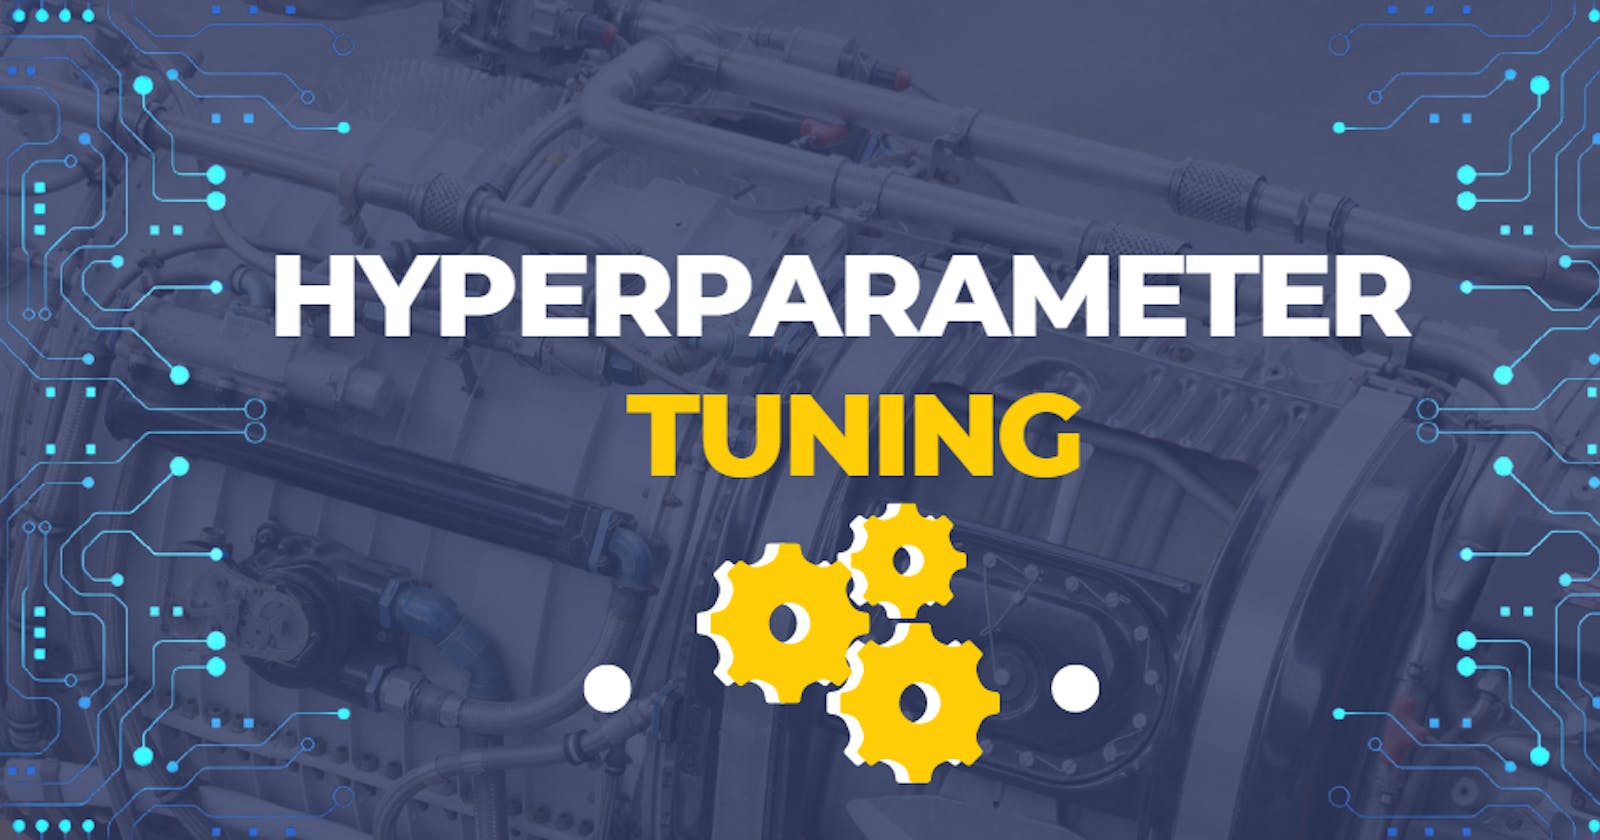 Hyperparameter Tuning In Machine Learning